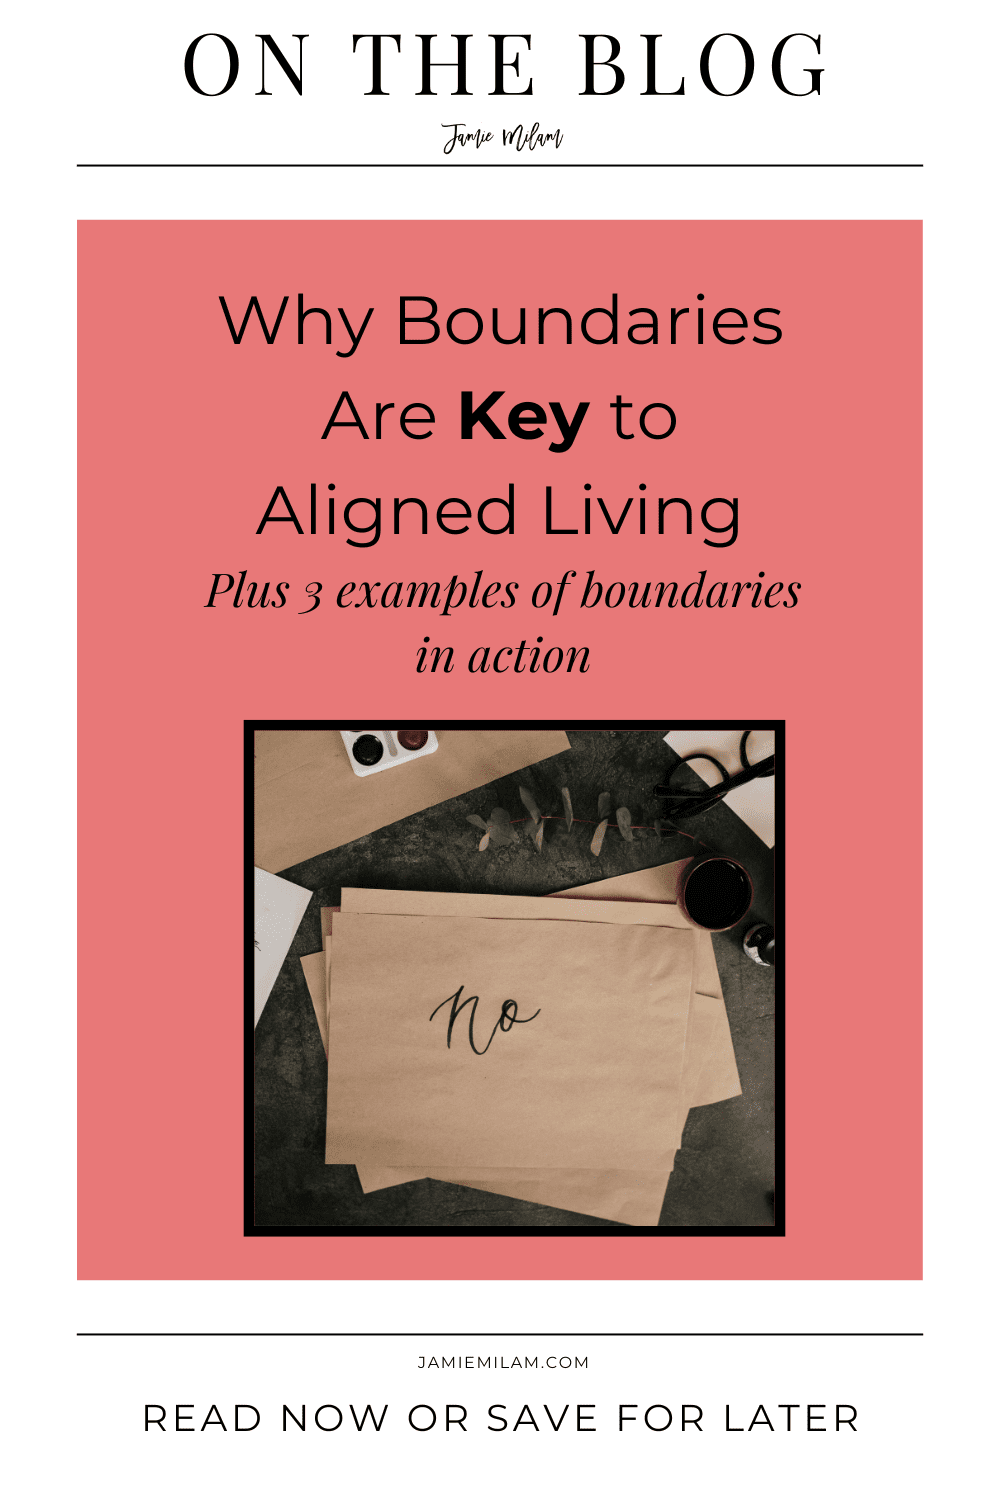 Image of the word "no" on an envelope and the text "Why Boundaries Are Key to Aligned Living: Plus 3 Practical Examples of Boundaries in Action"